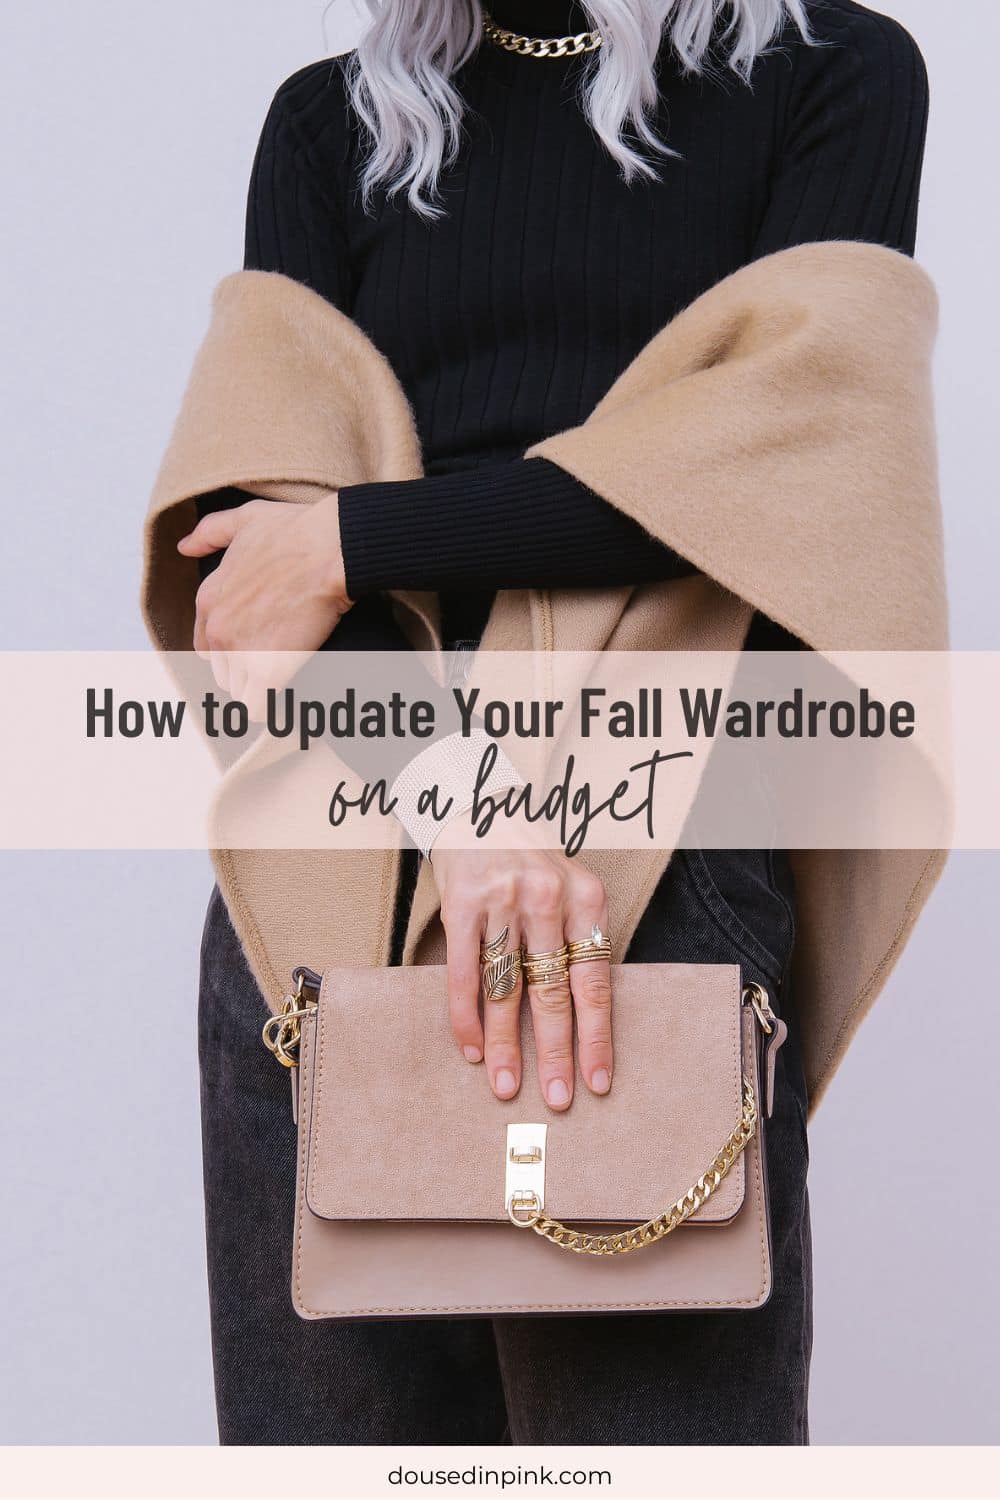 tips for updating your wardrobe on a budget